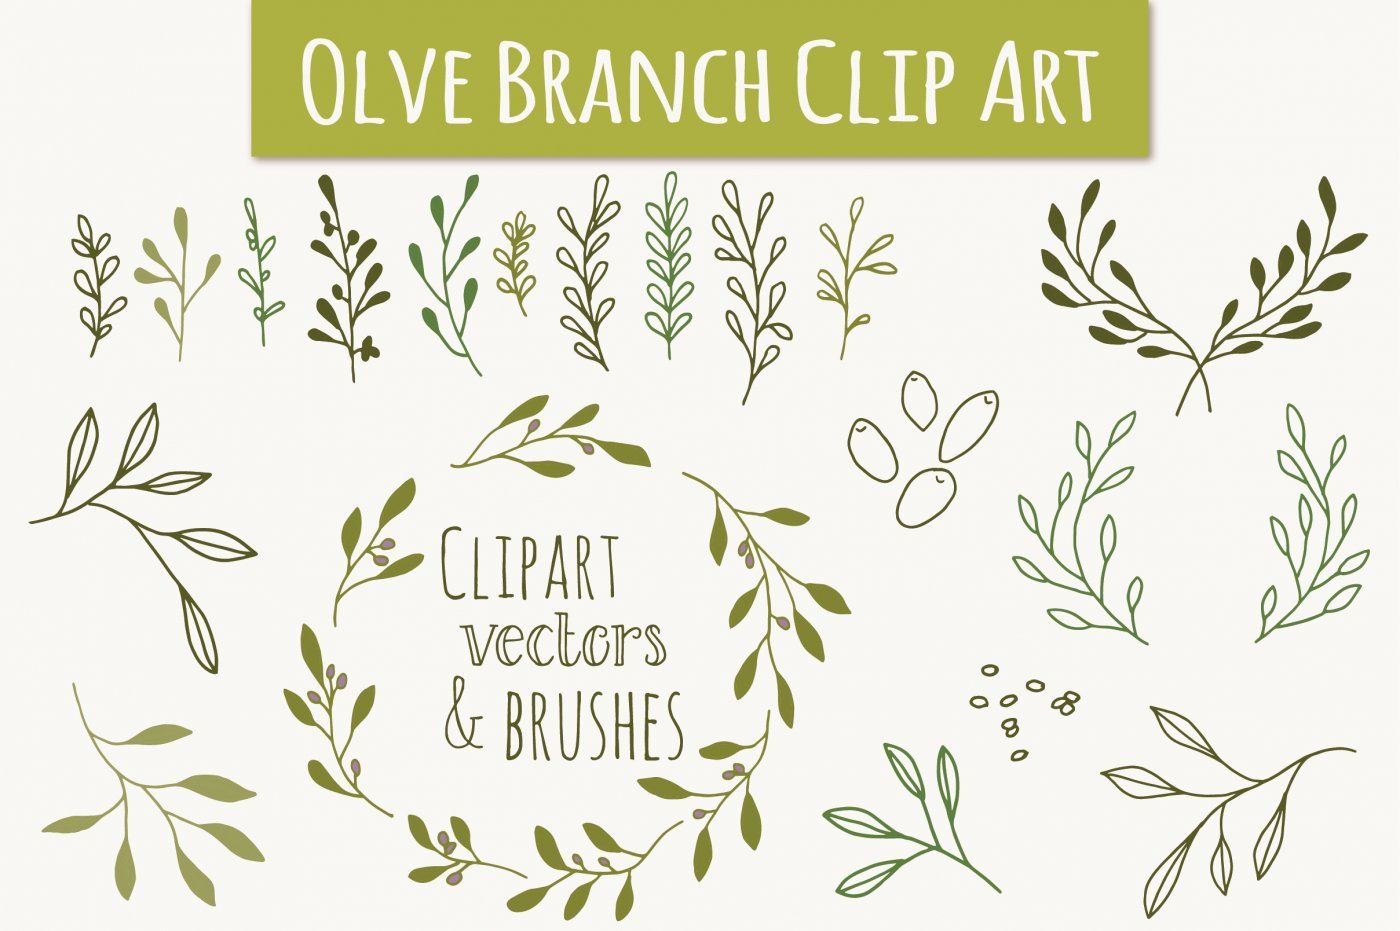 Olive Branch Clip Art & vectors By The Pen and Brush | TheHungryJPEG